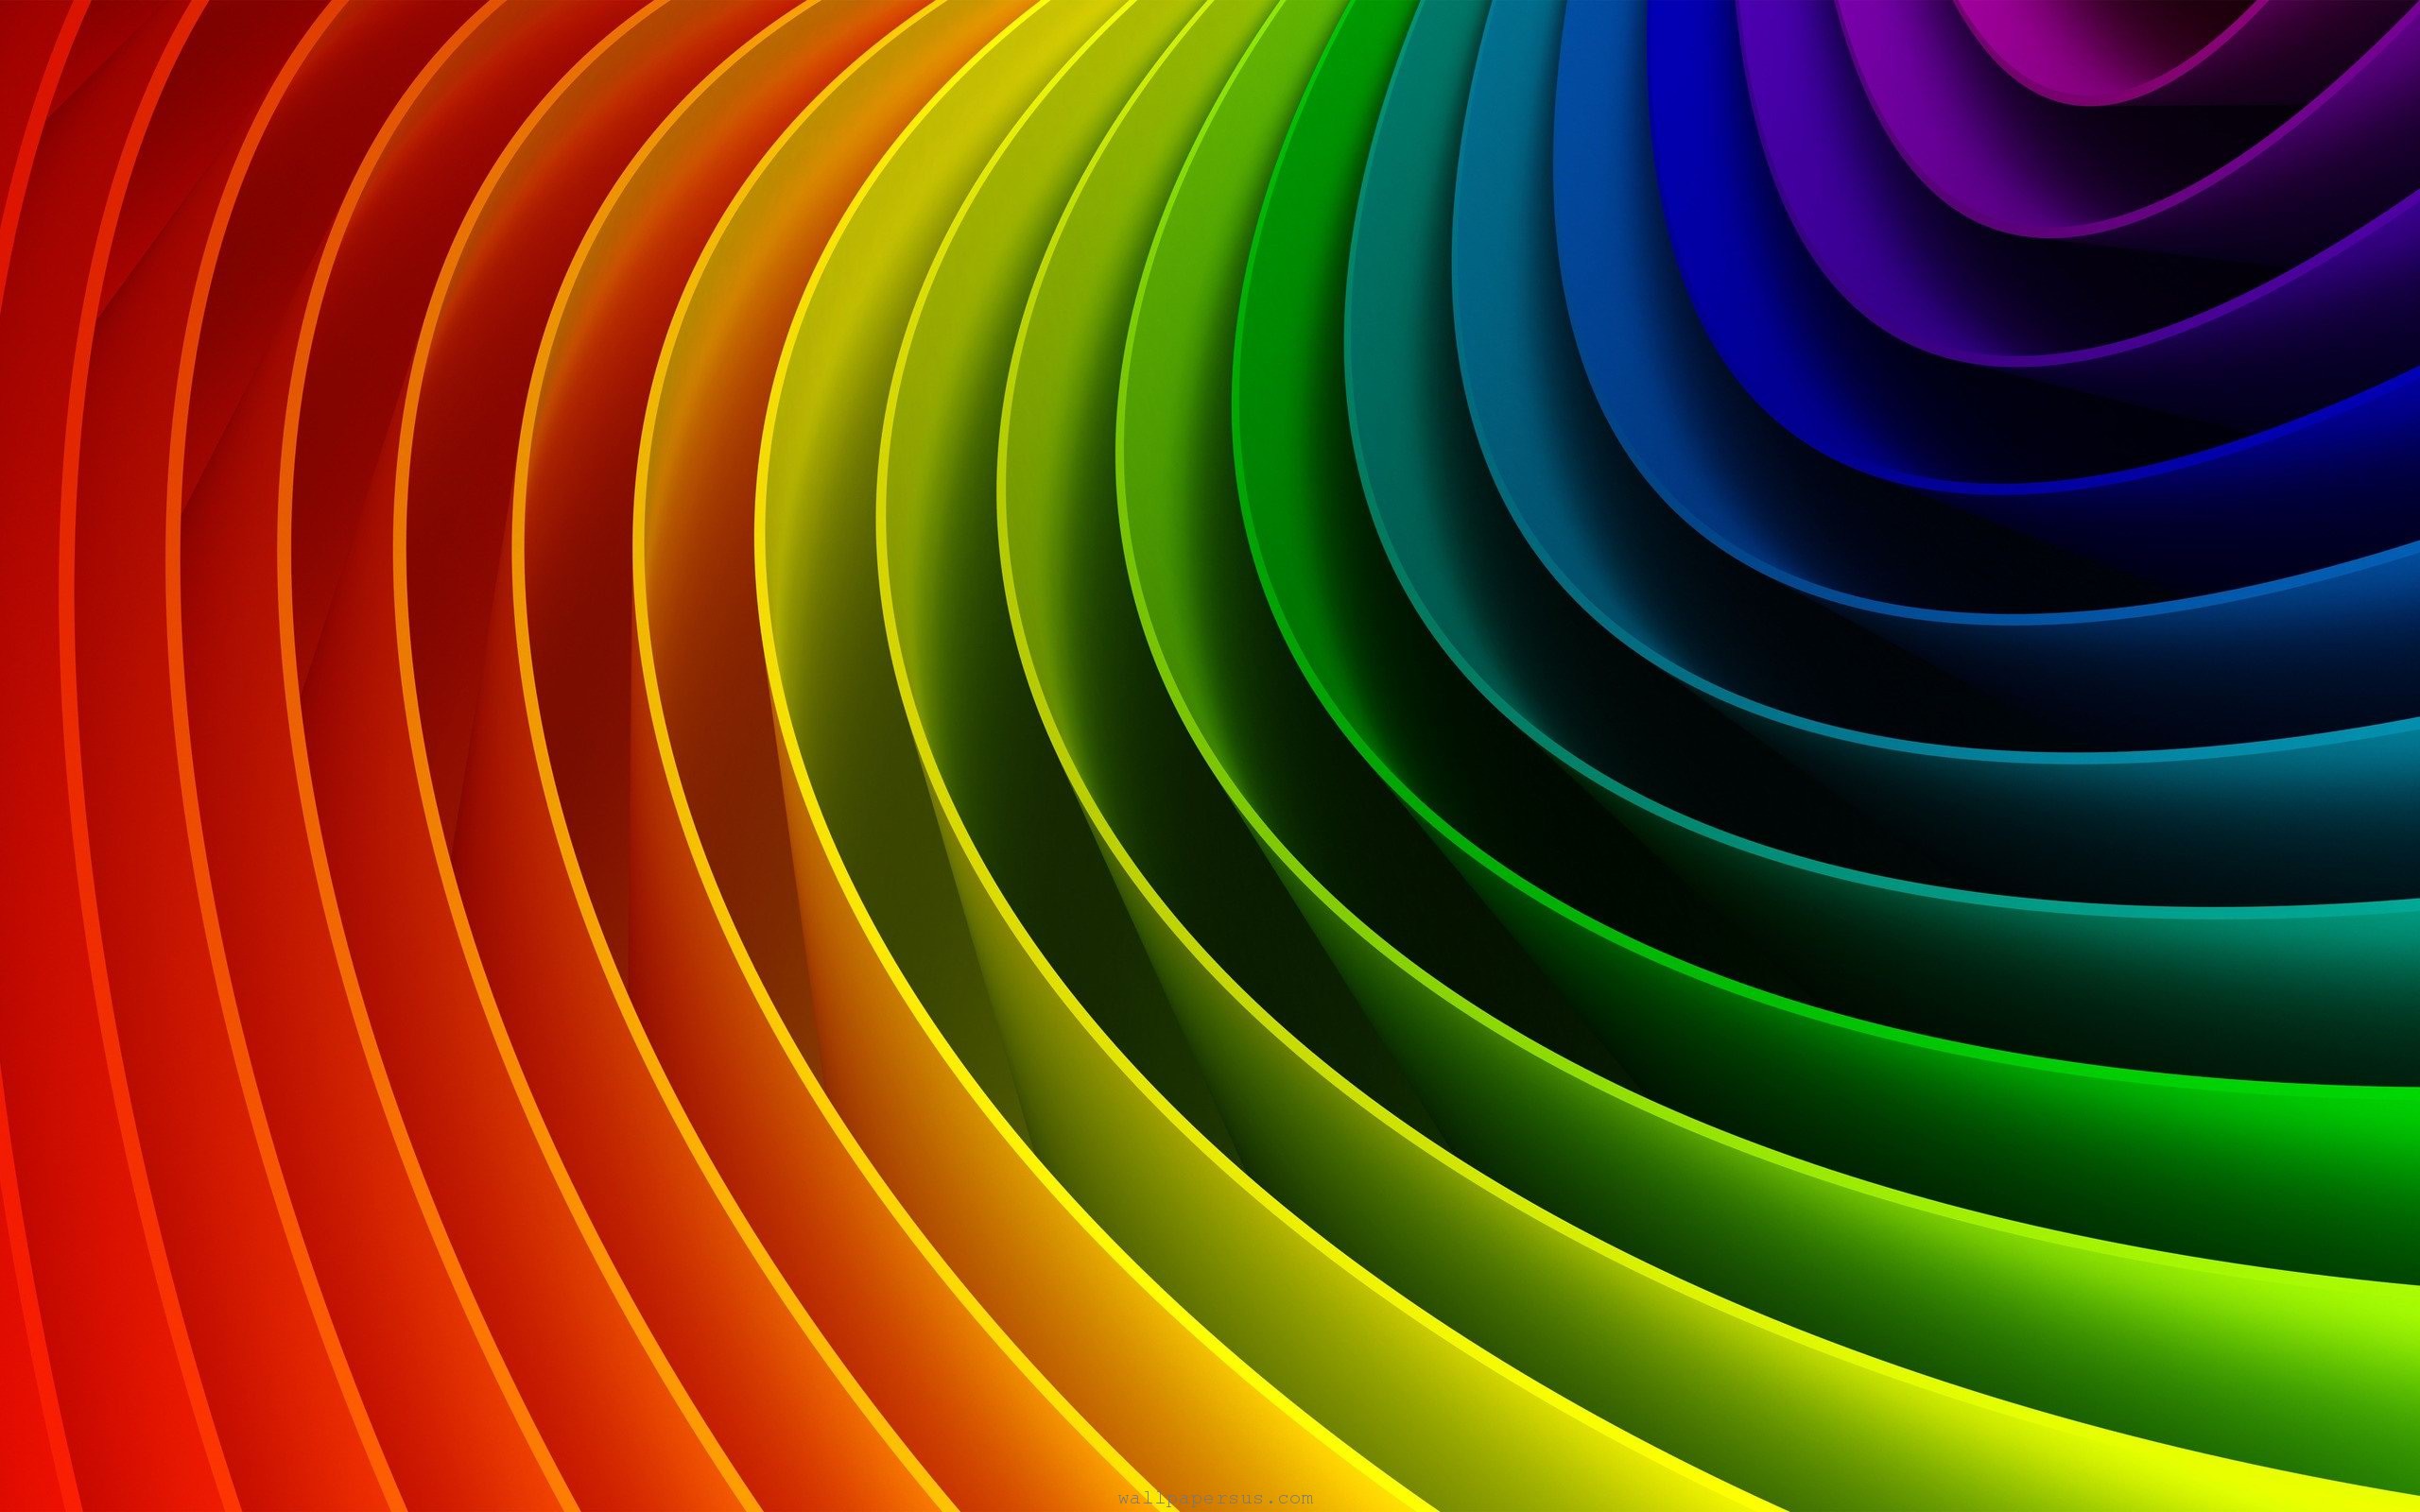 3D Abstract Colorful Background download wallpapersjpg